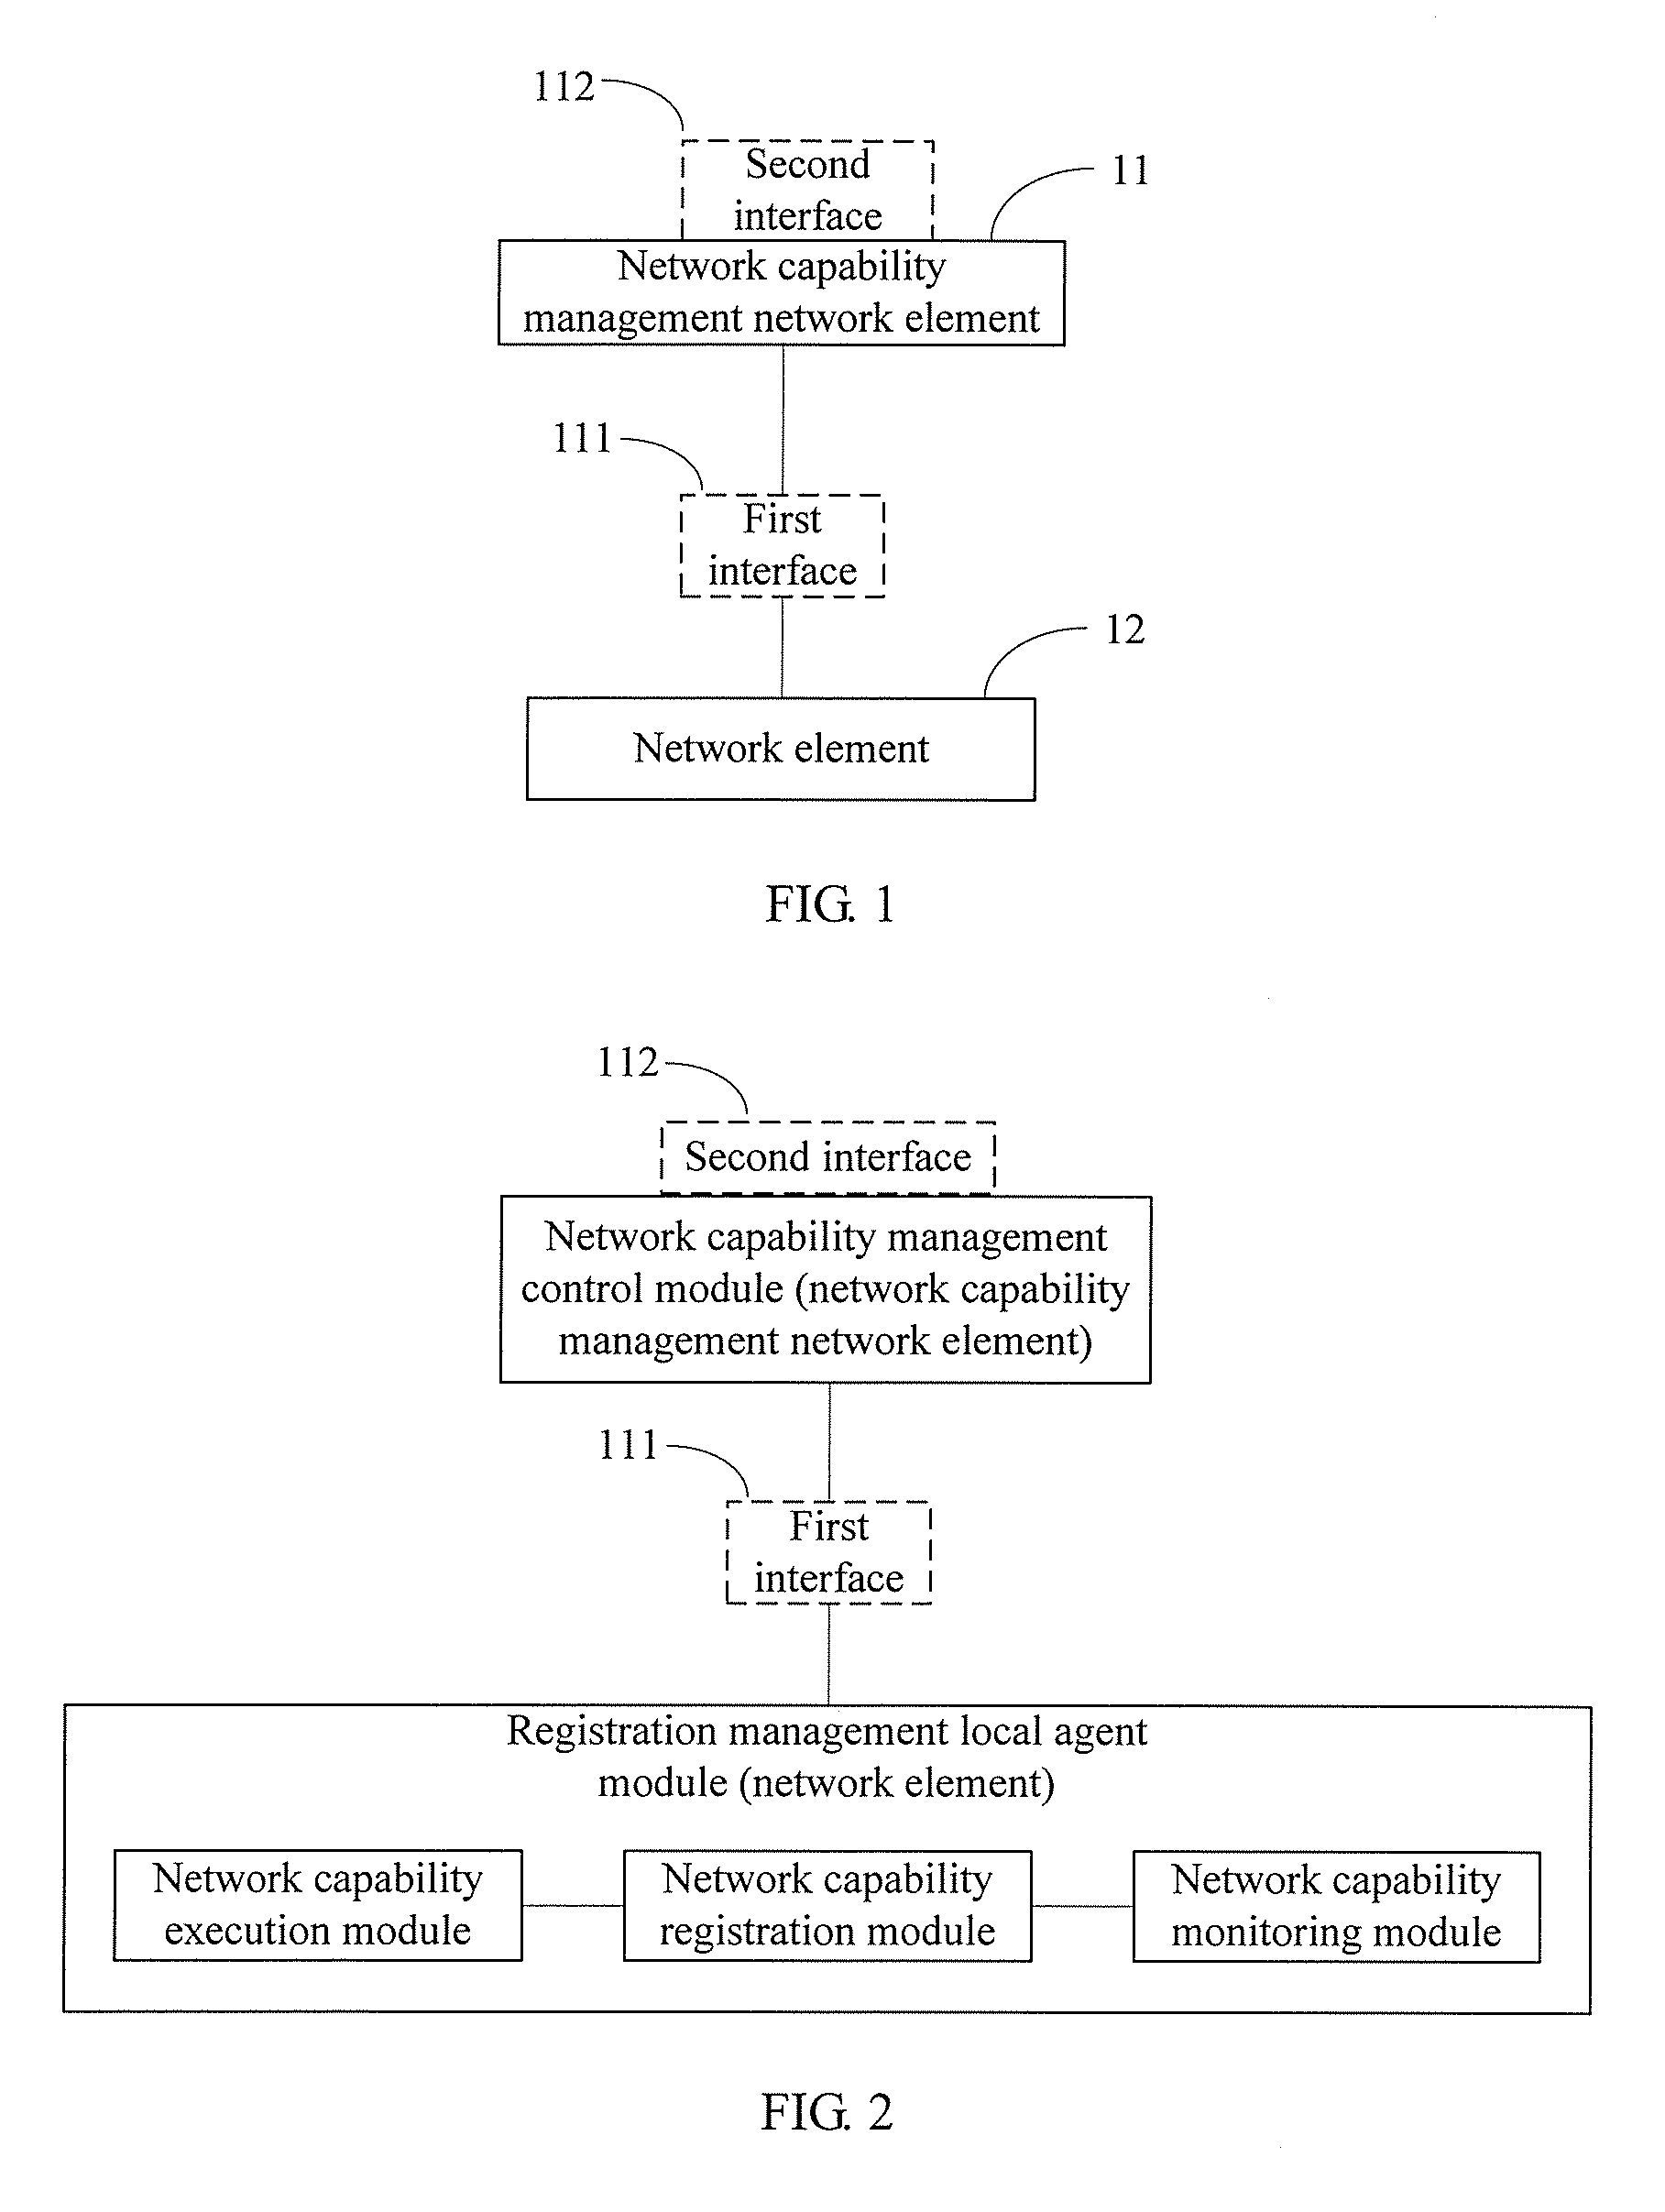 System and method for opening network capability, and related network element